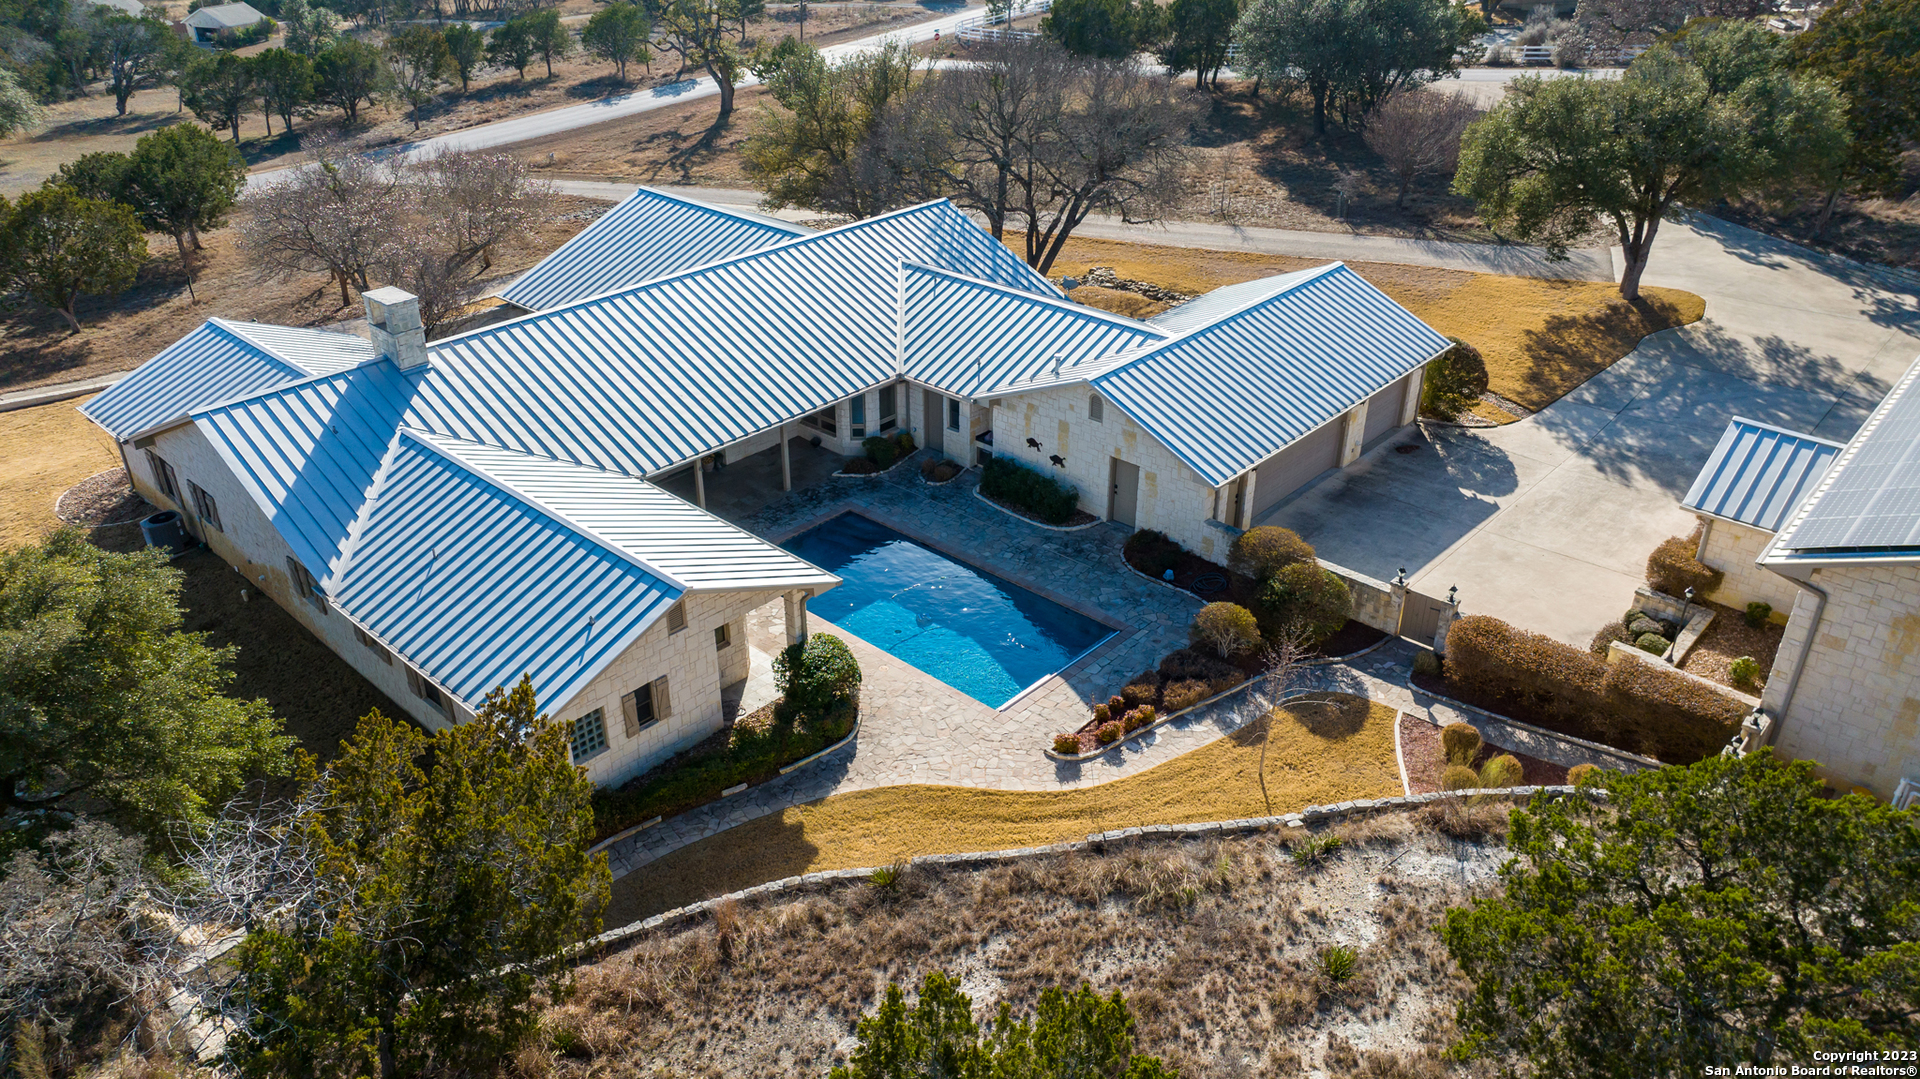 THE HORIZON - Gorgeous custom home & oversized RV barn built on 6.23 acres. Immaculately maintained w/Hill Country views, impressive open plan, high ceilings, walls of windows, built-ins, natural hardwood floors, formal dining, eat-in kitchen, island, SS apps, WI pantry, 4 beds (one currently used as media room) & office. Every corner shows attention to detail-from the airy well-appointed kitchen to designer touches on walls & ceilings. Great room w/stone masonry fireplace flanked by dbl sliding doors leading to spacious cov'd porch, pool & hot tub. Owner's suite w/dbl vanities, WI shower, lg WI closet, sitting area, hot tub/pool access & natural light. Special Features: surround sound, reverse osmosis in kitchen, pool re-surfaced in 2022, granite counters, beautiful stone accent wall, vaulted ceilings w/wood beams, exceptional outdoor living, 3-Car plus RV garage w/workshop. Lots of parking w/circ drive + driveway to garage. Gated 1066-ac community w/private roads also serves as a wildlife preserve w/Fallow Deer, Black Buck Antelope, Turkey & more roaming in a peaceful atmosphere. Hunting allowed per HOA regs. Minutes to Kerrville. L/A is daughter of seller & POA on property sale.  Buyer to purchase survey if one is needed.